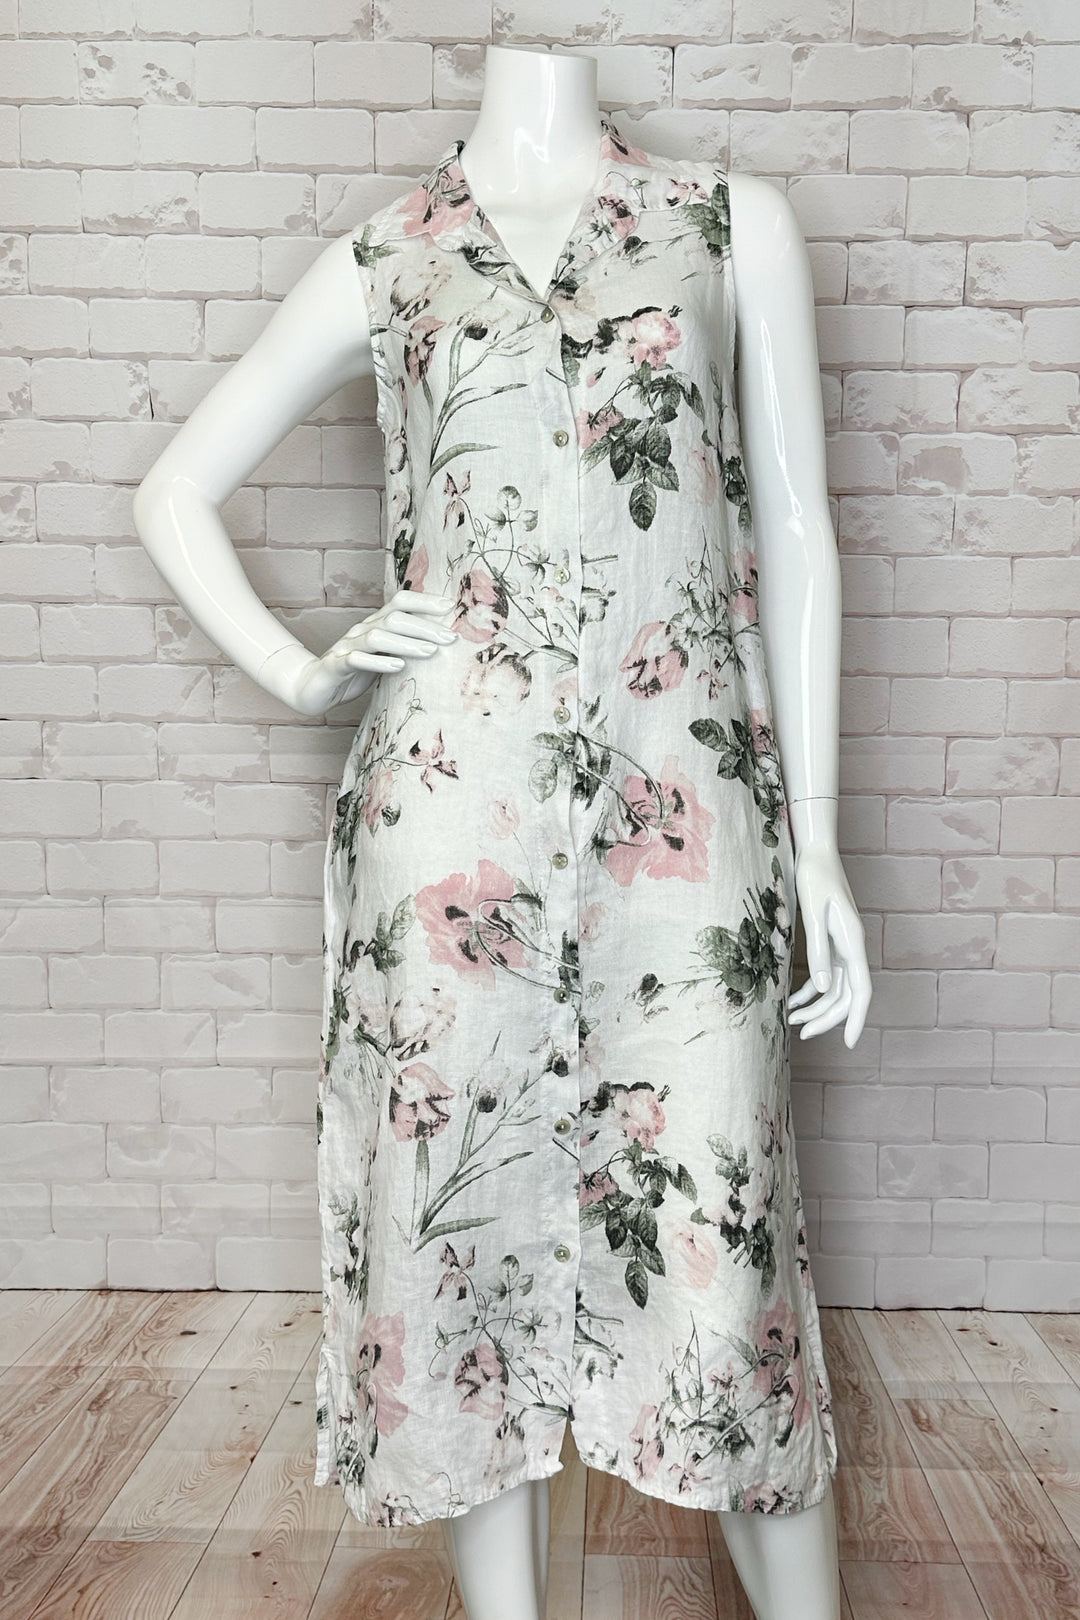 Cherishh Spring 2024 Featuring a beautiful floral print, this sleeveless duster dress exudes a flowy and loose feel. With a round neckline, full front buttons it's perfect for warmer spring days.